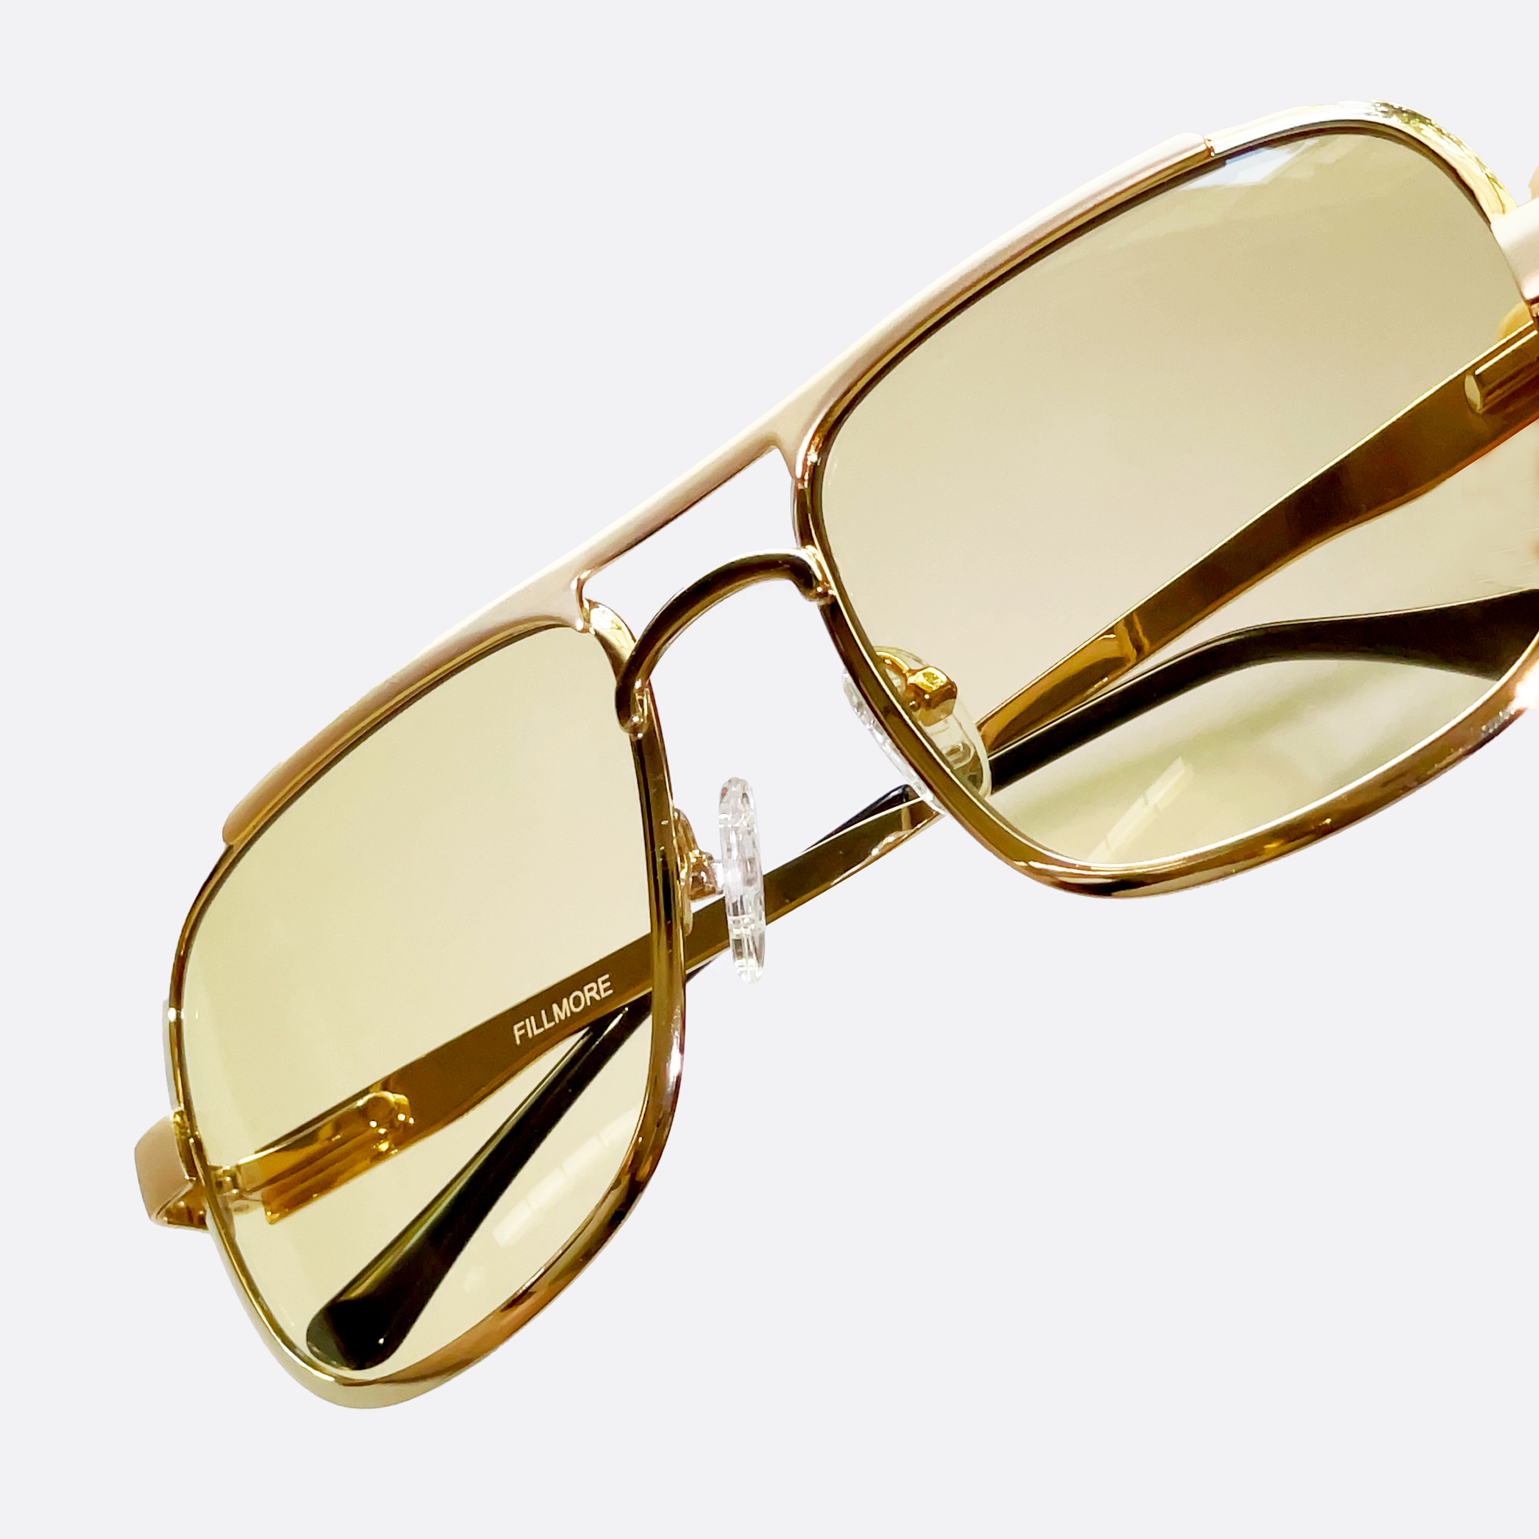 FILLMORE Gold/Tan Limited Edition Giant Vintage Original - Luxe *As Seen On: Renee Rapp*